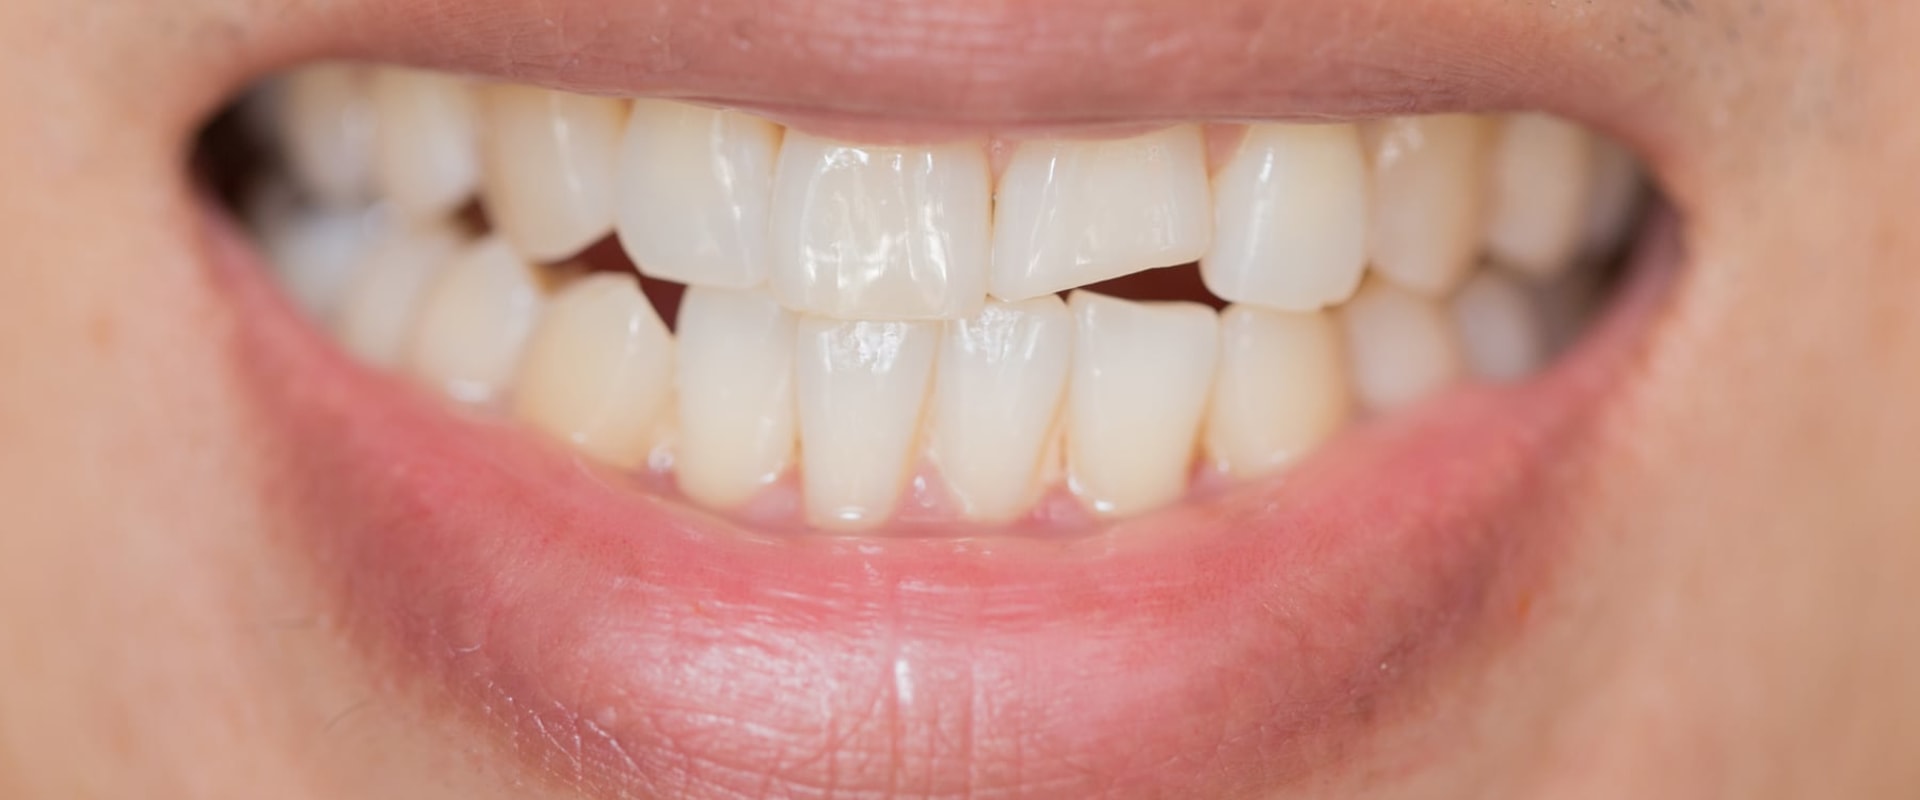 Do I Need to Fix a Chipped Tooth?